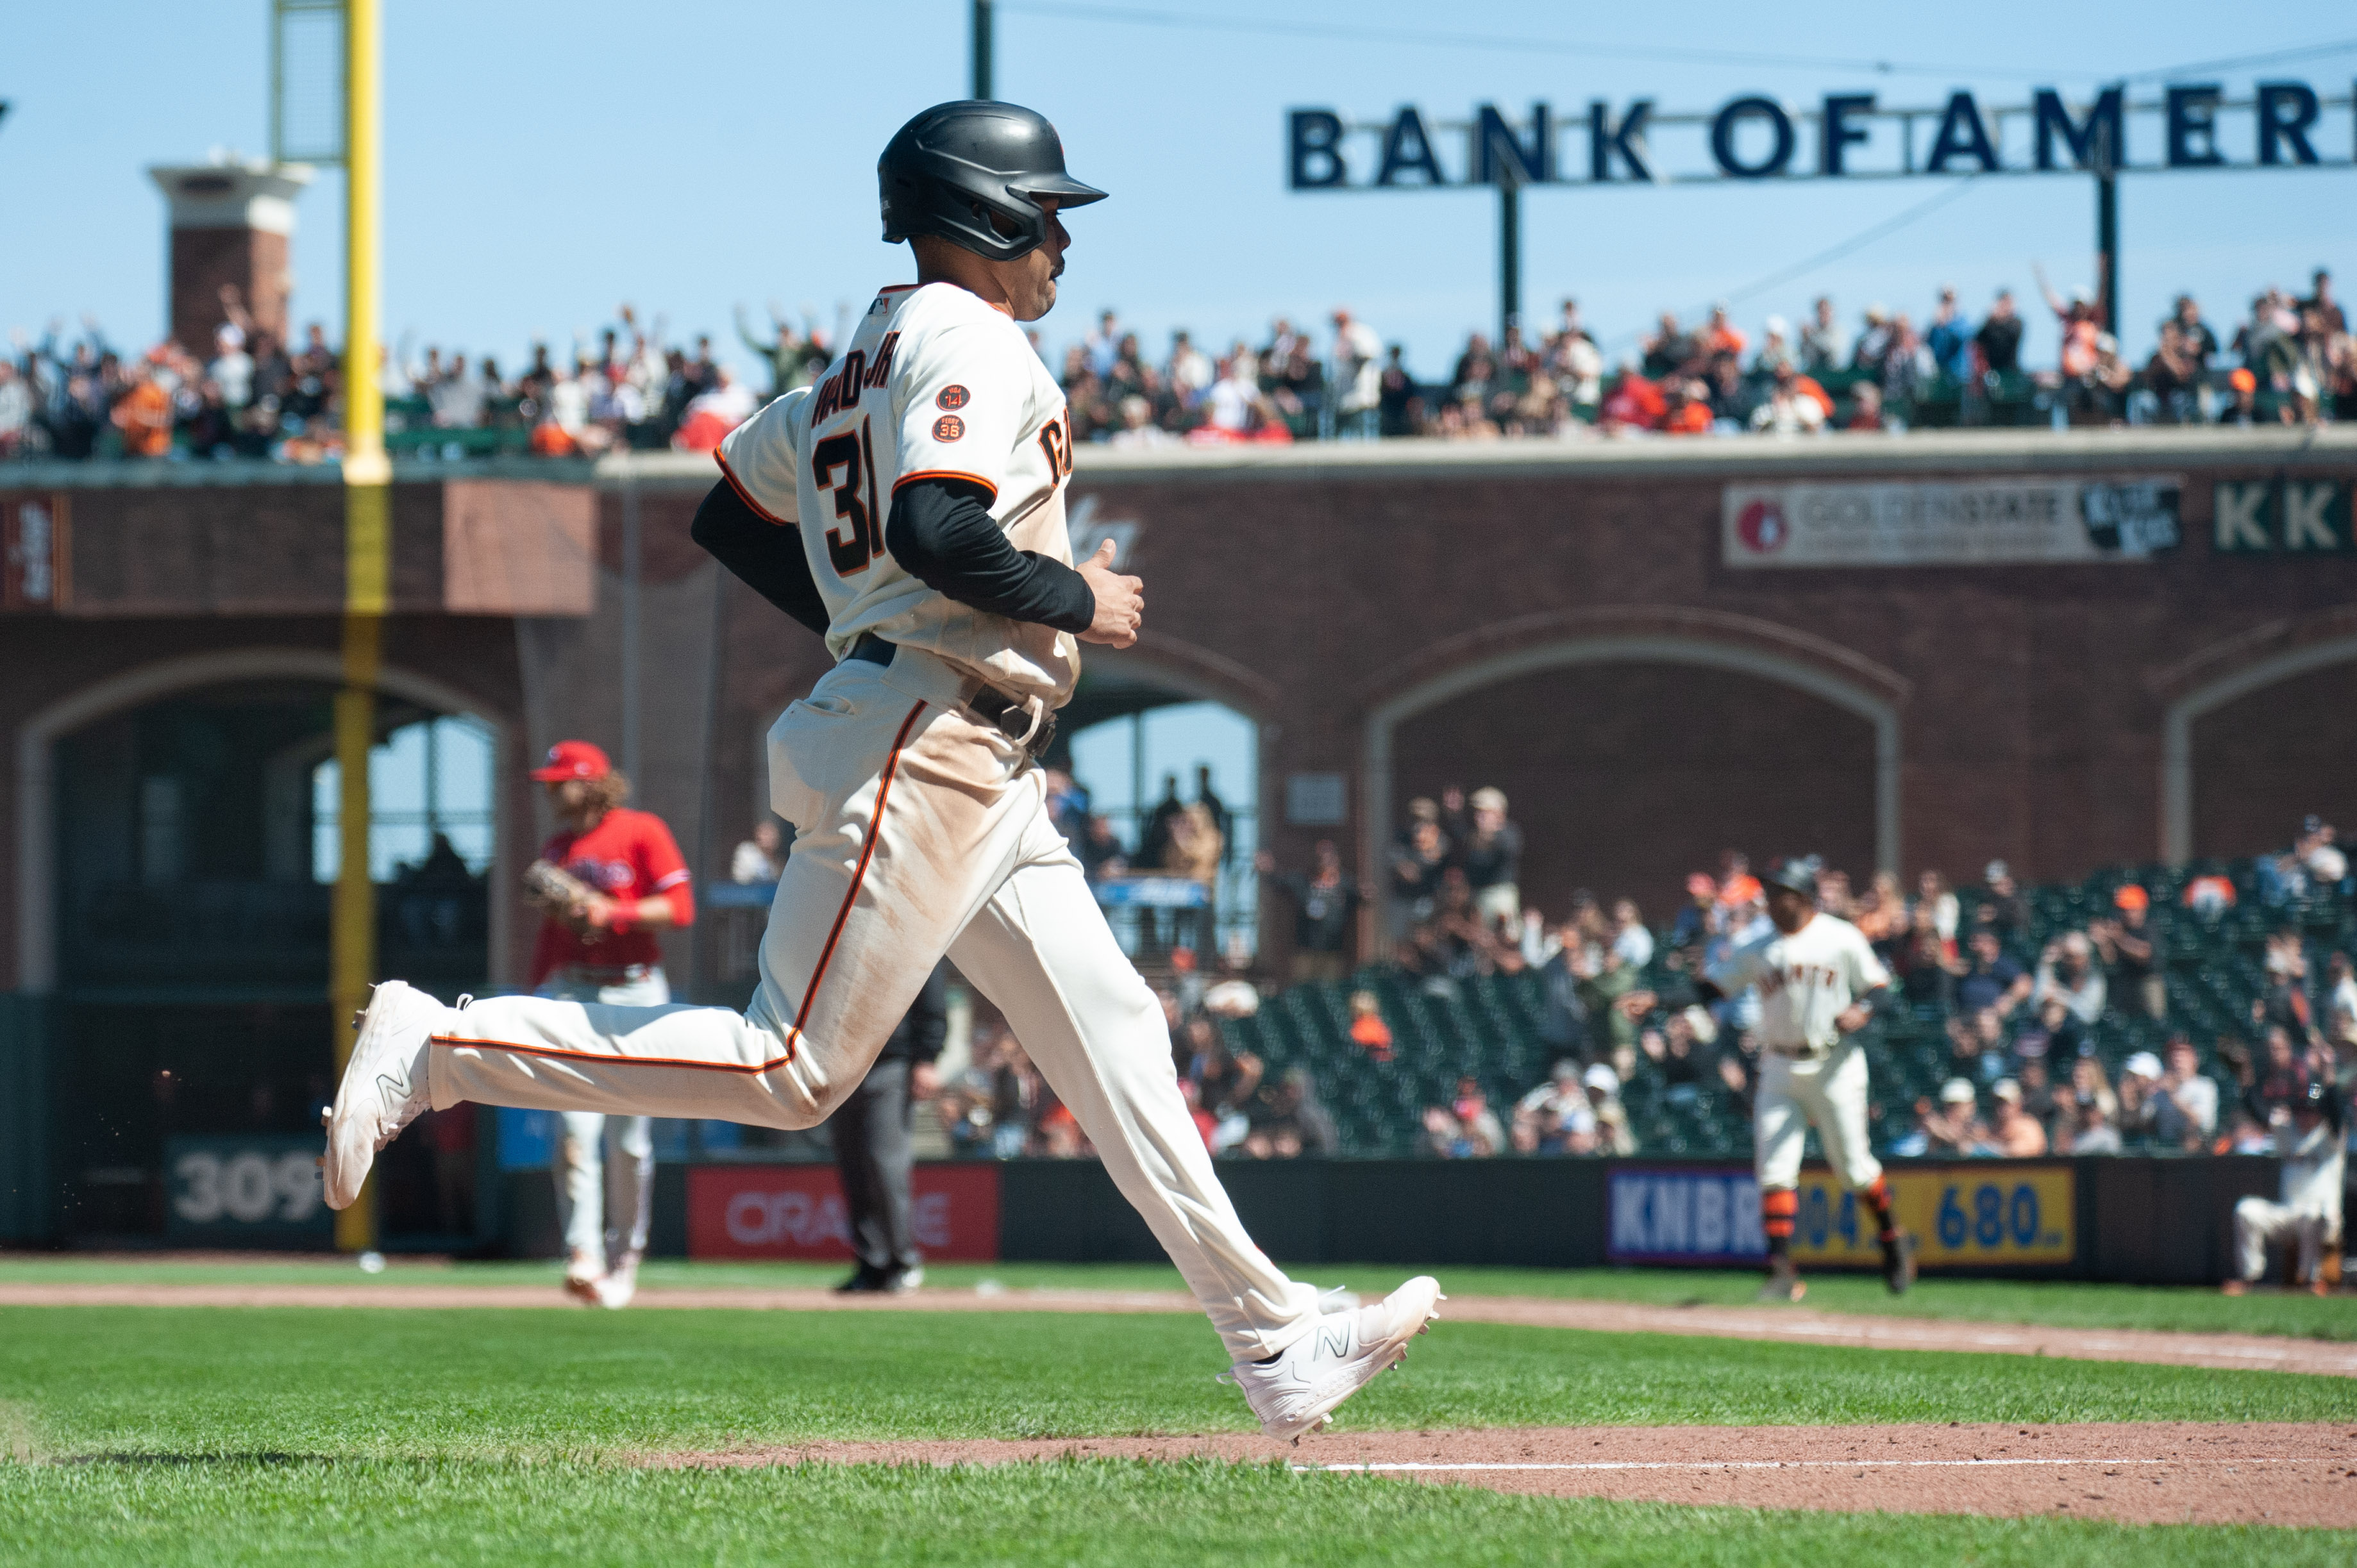 Giants edge Phillies 7-4 to complete series sweep